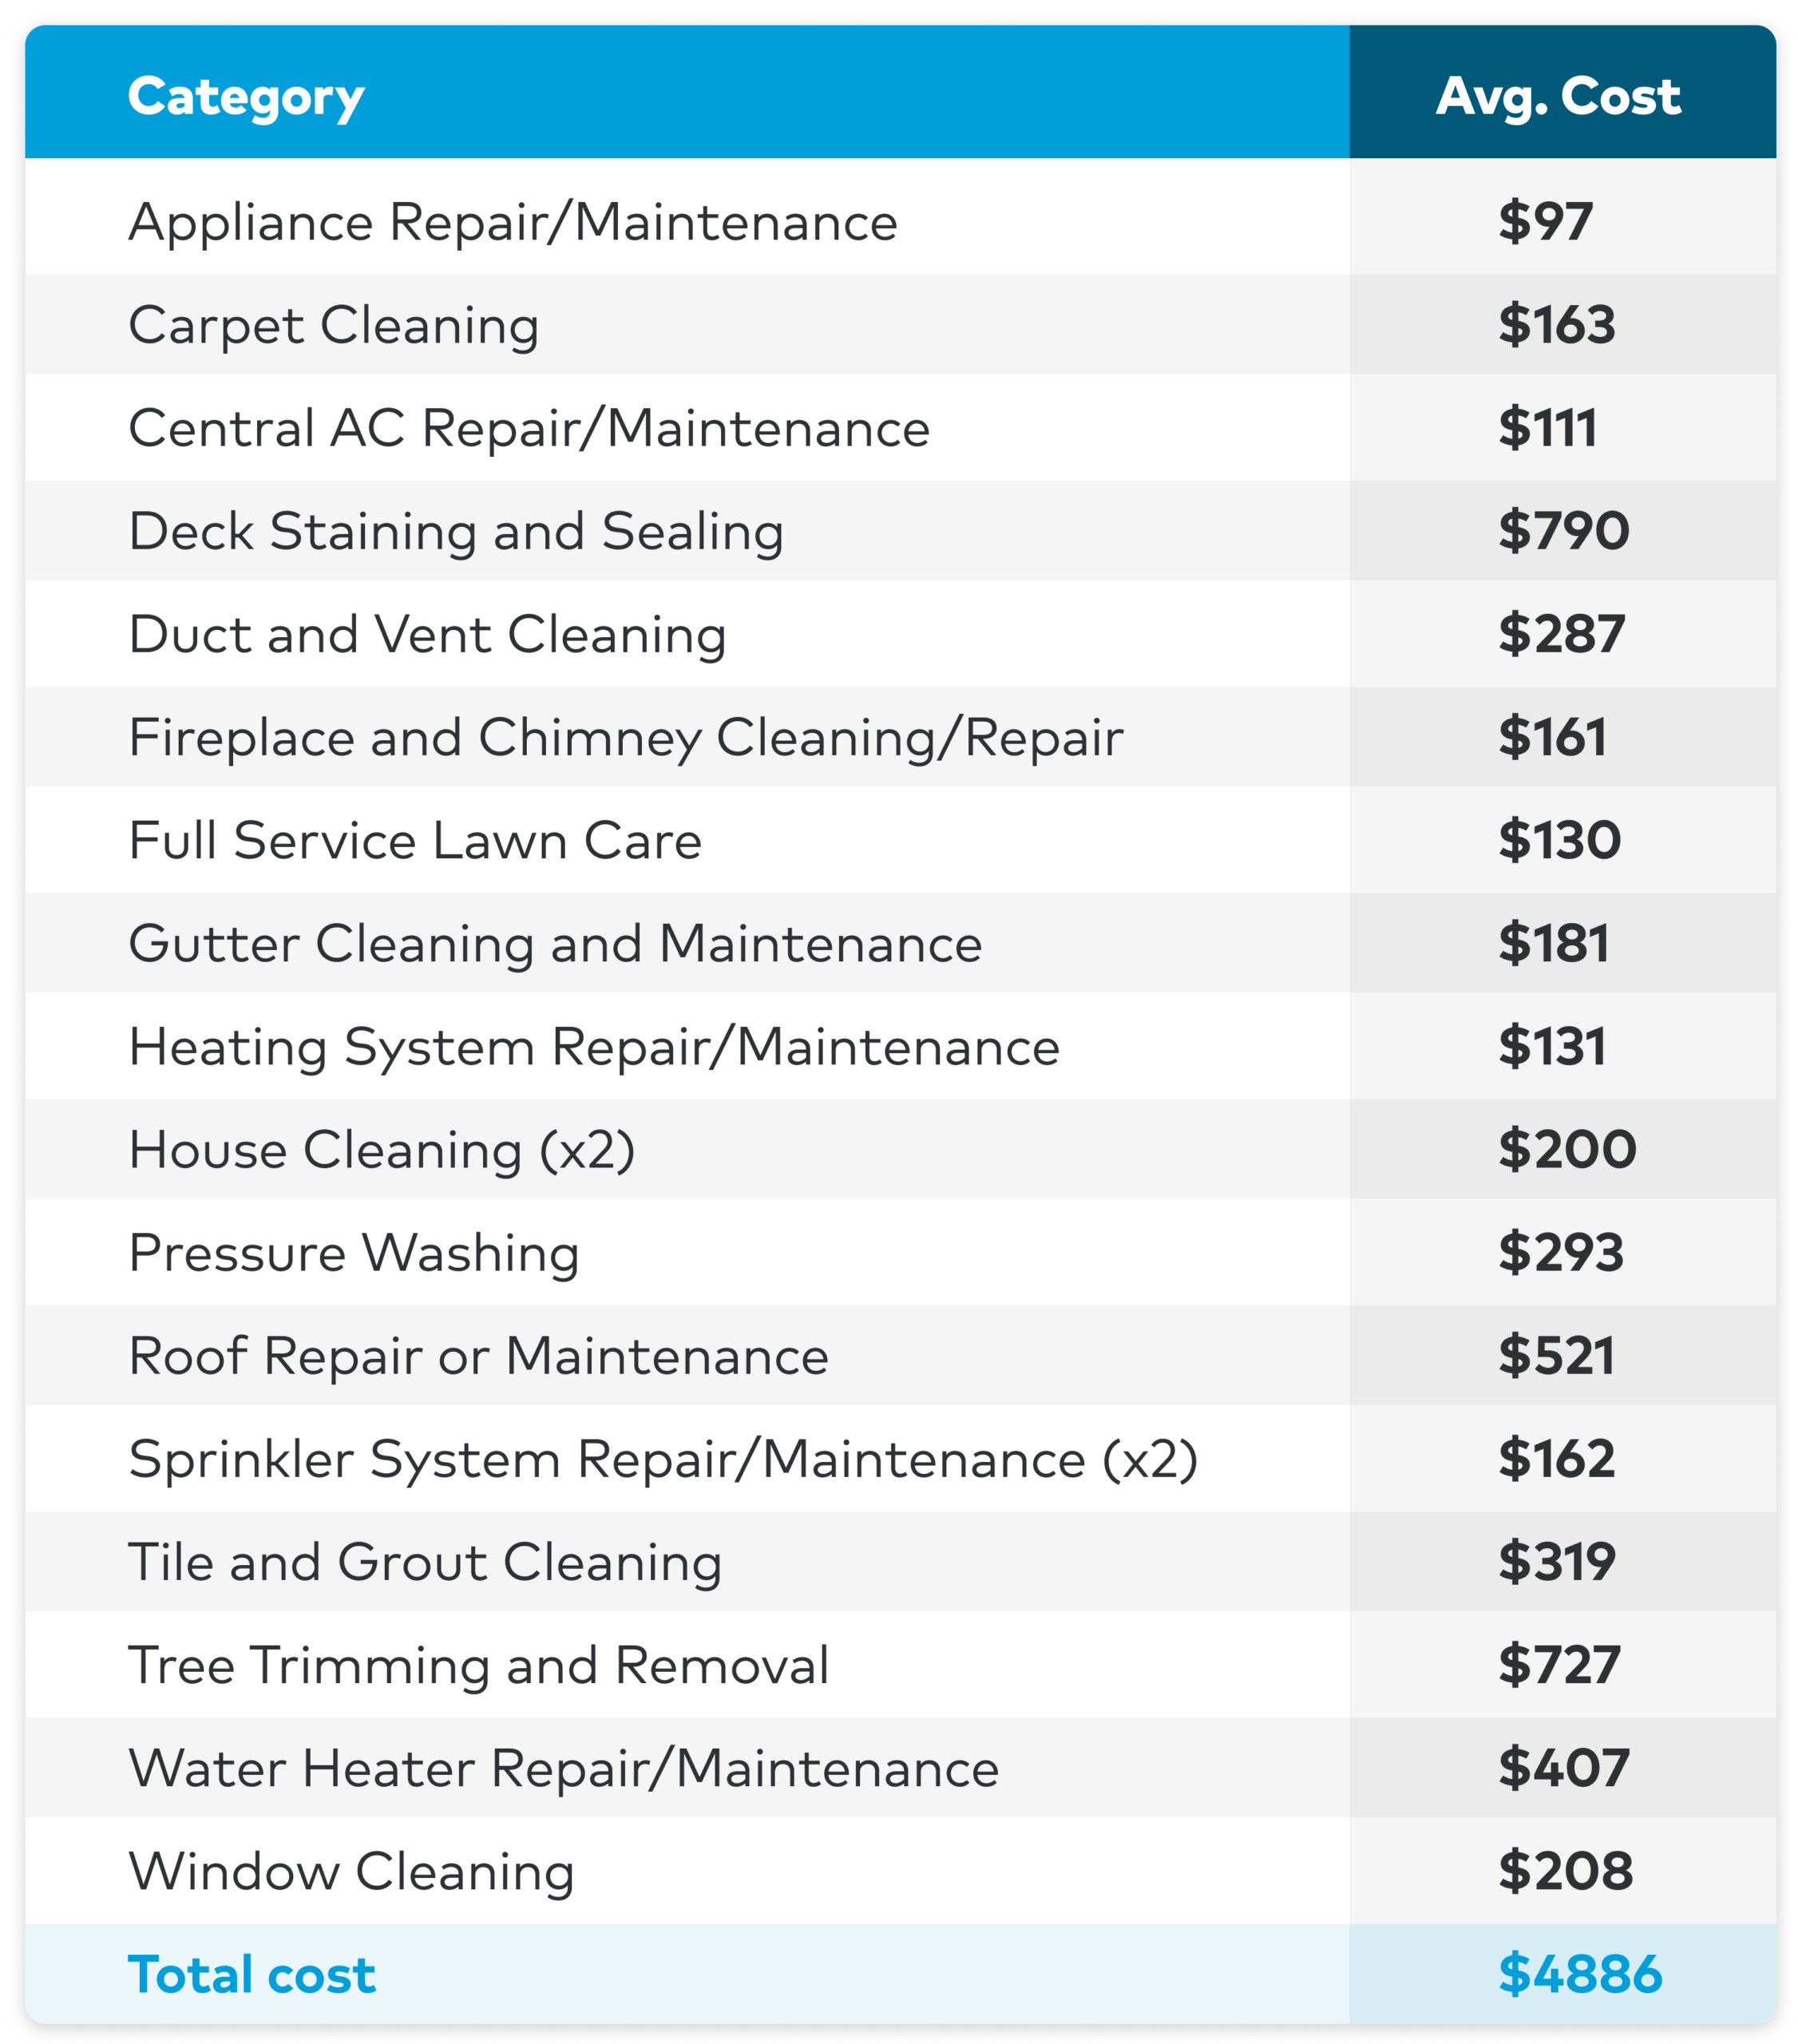 The average cost of home repairs, from $97 for appliance repairs to $790 for deck staining and sealing